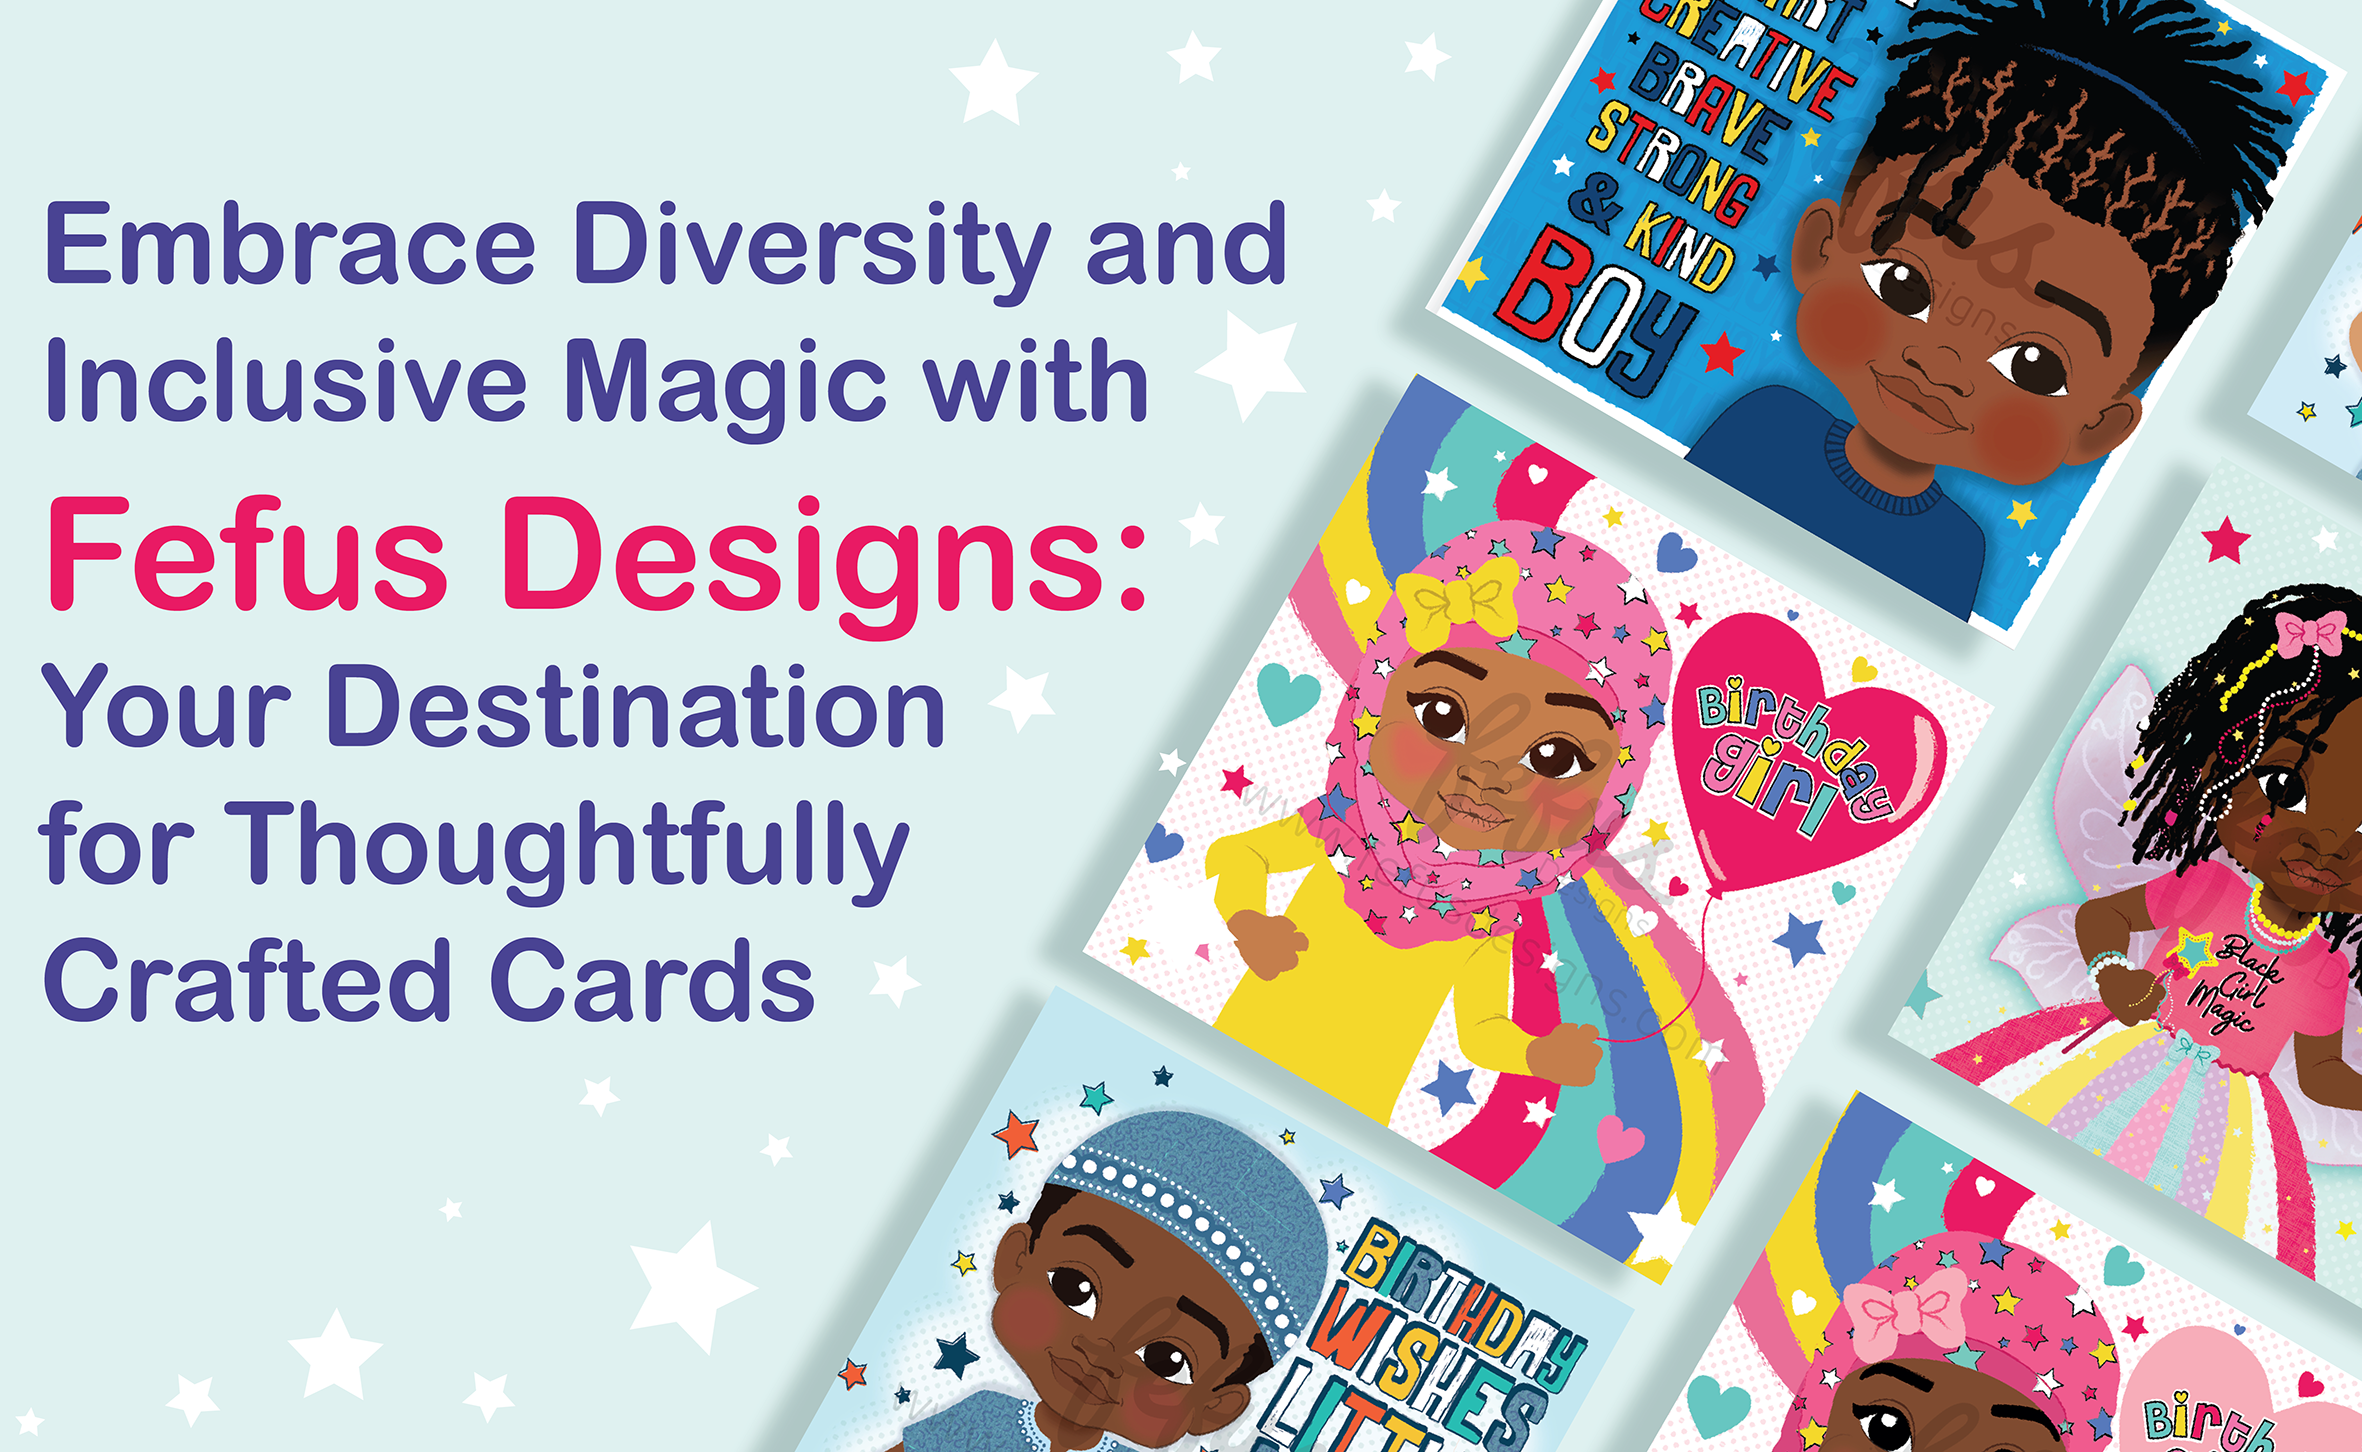 Embrace Diversity and Inclusive Magic with Fefus Designs: Your Destination for Thoughtfully Crafted Cards